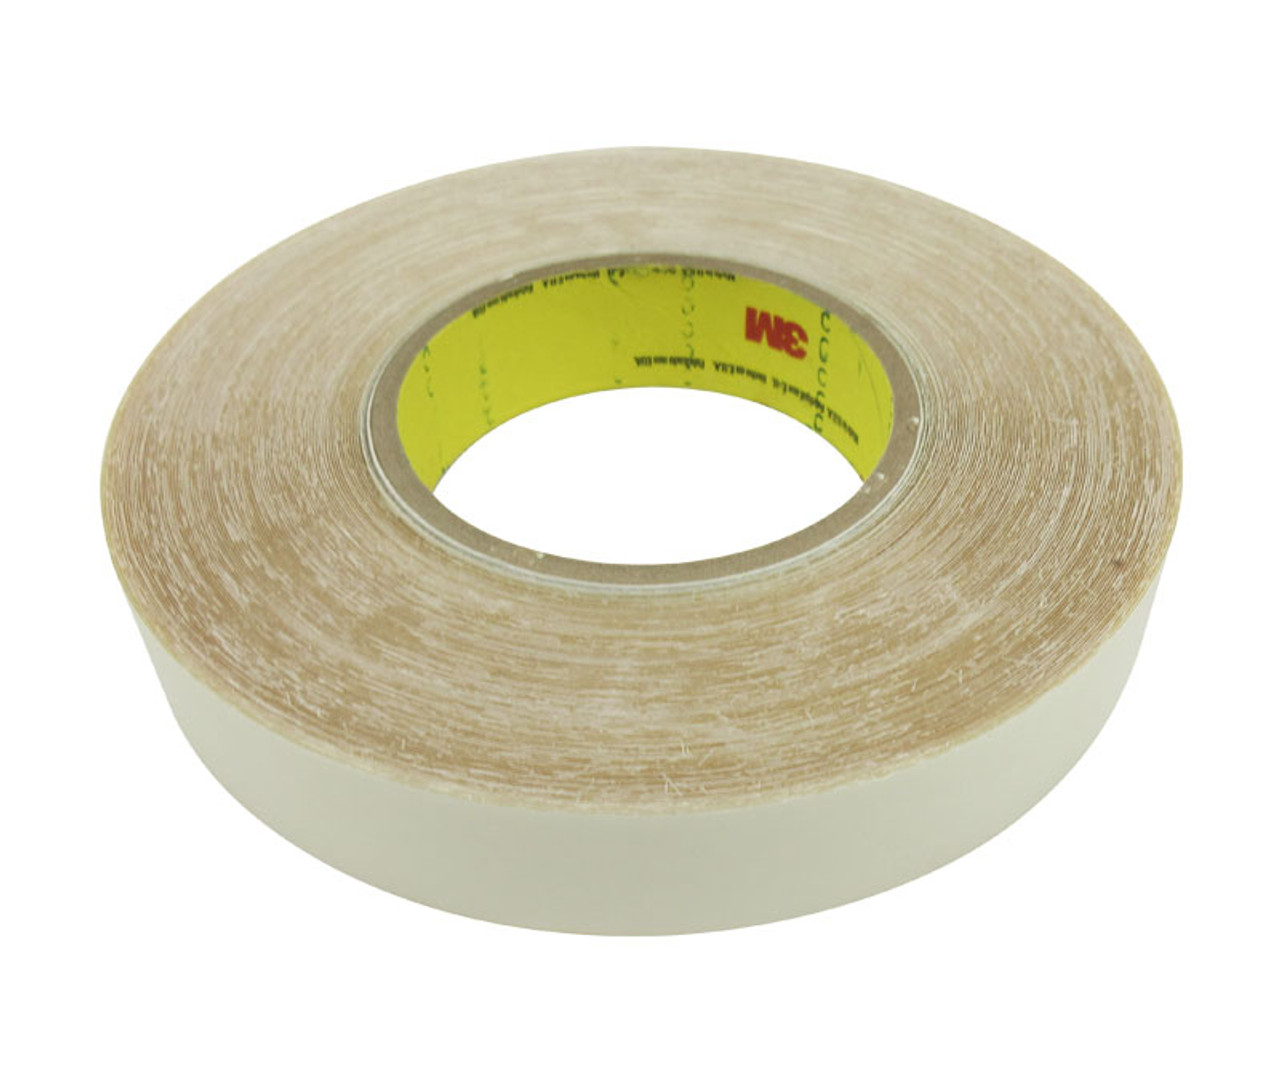 3M 9088-200 Double sided tape thin - Transparent - Alternative available  GPT-020 art N0421398 - 25 mm x 50 m x 0.2 mm - per 1 roll